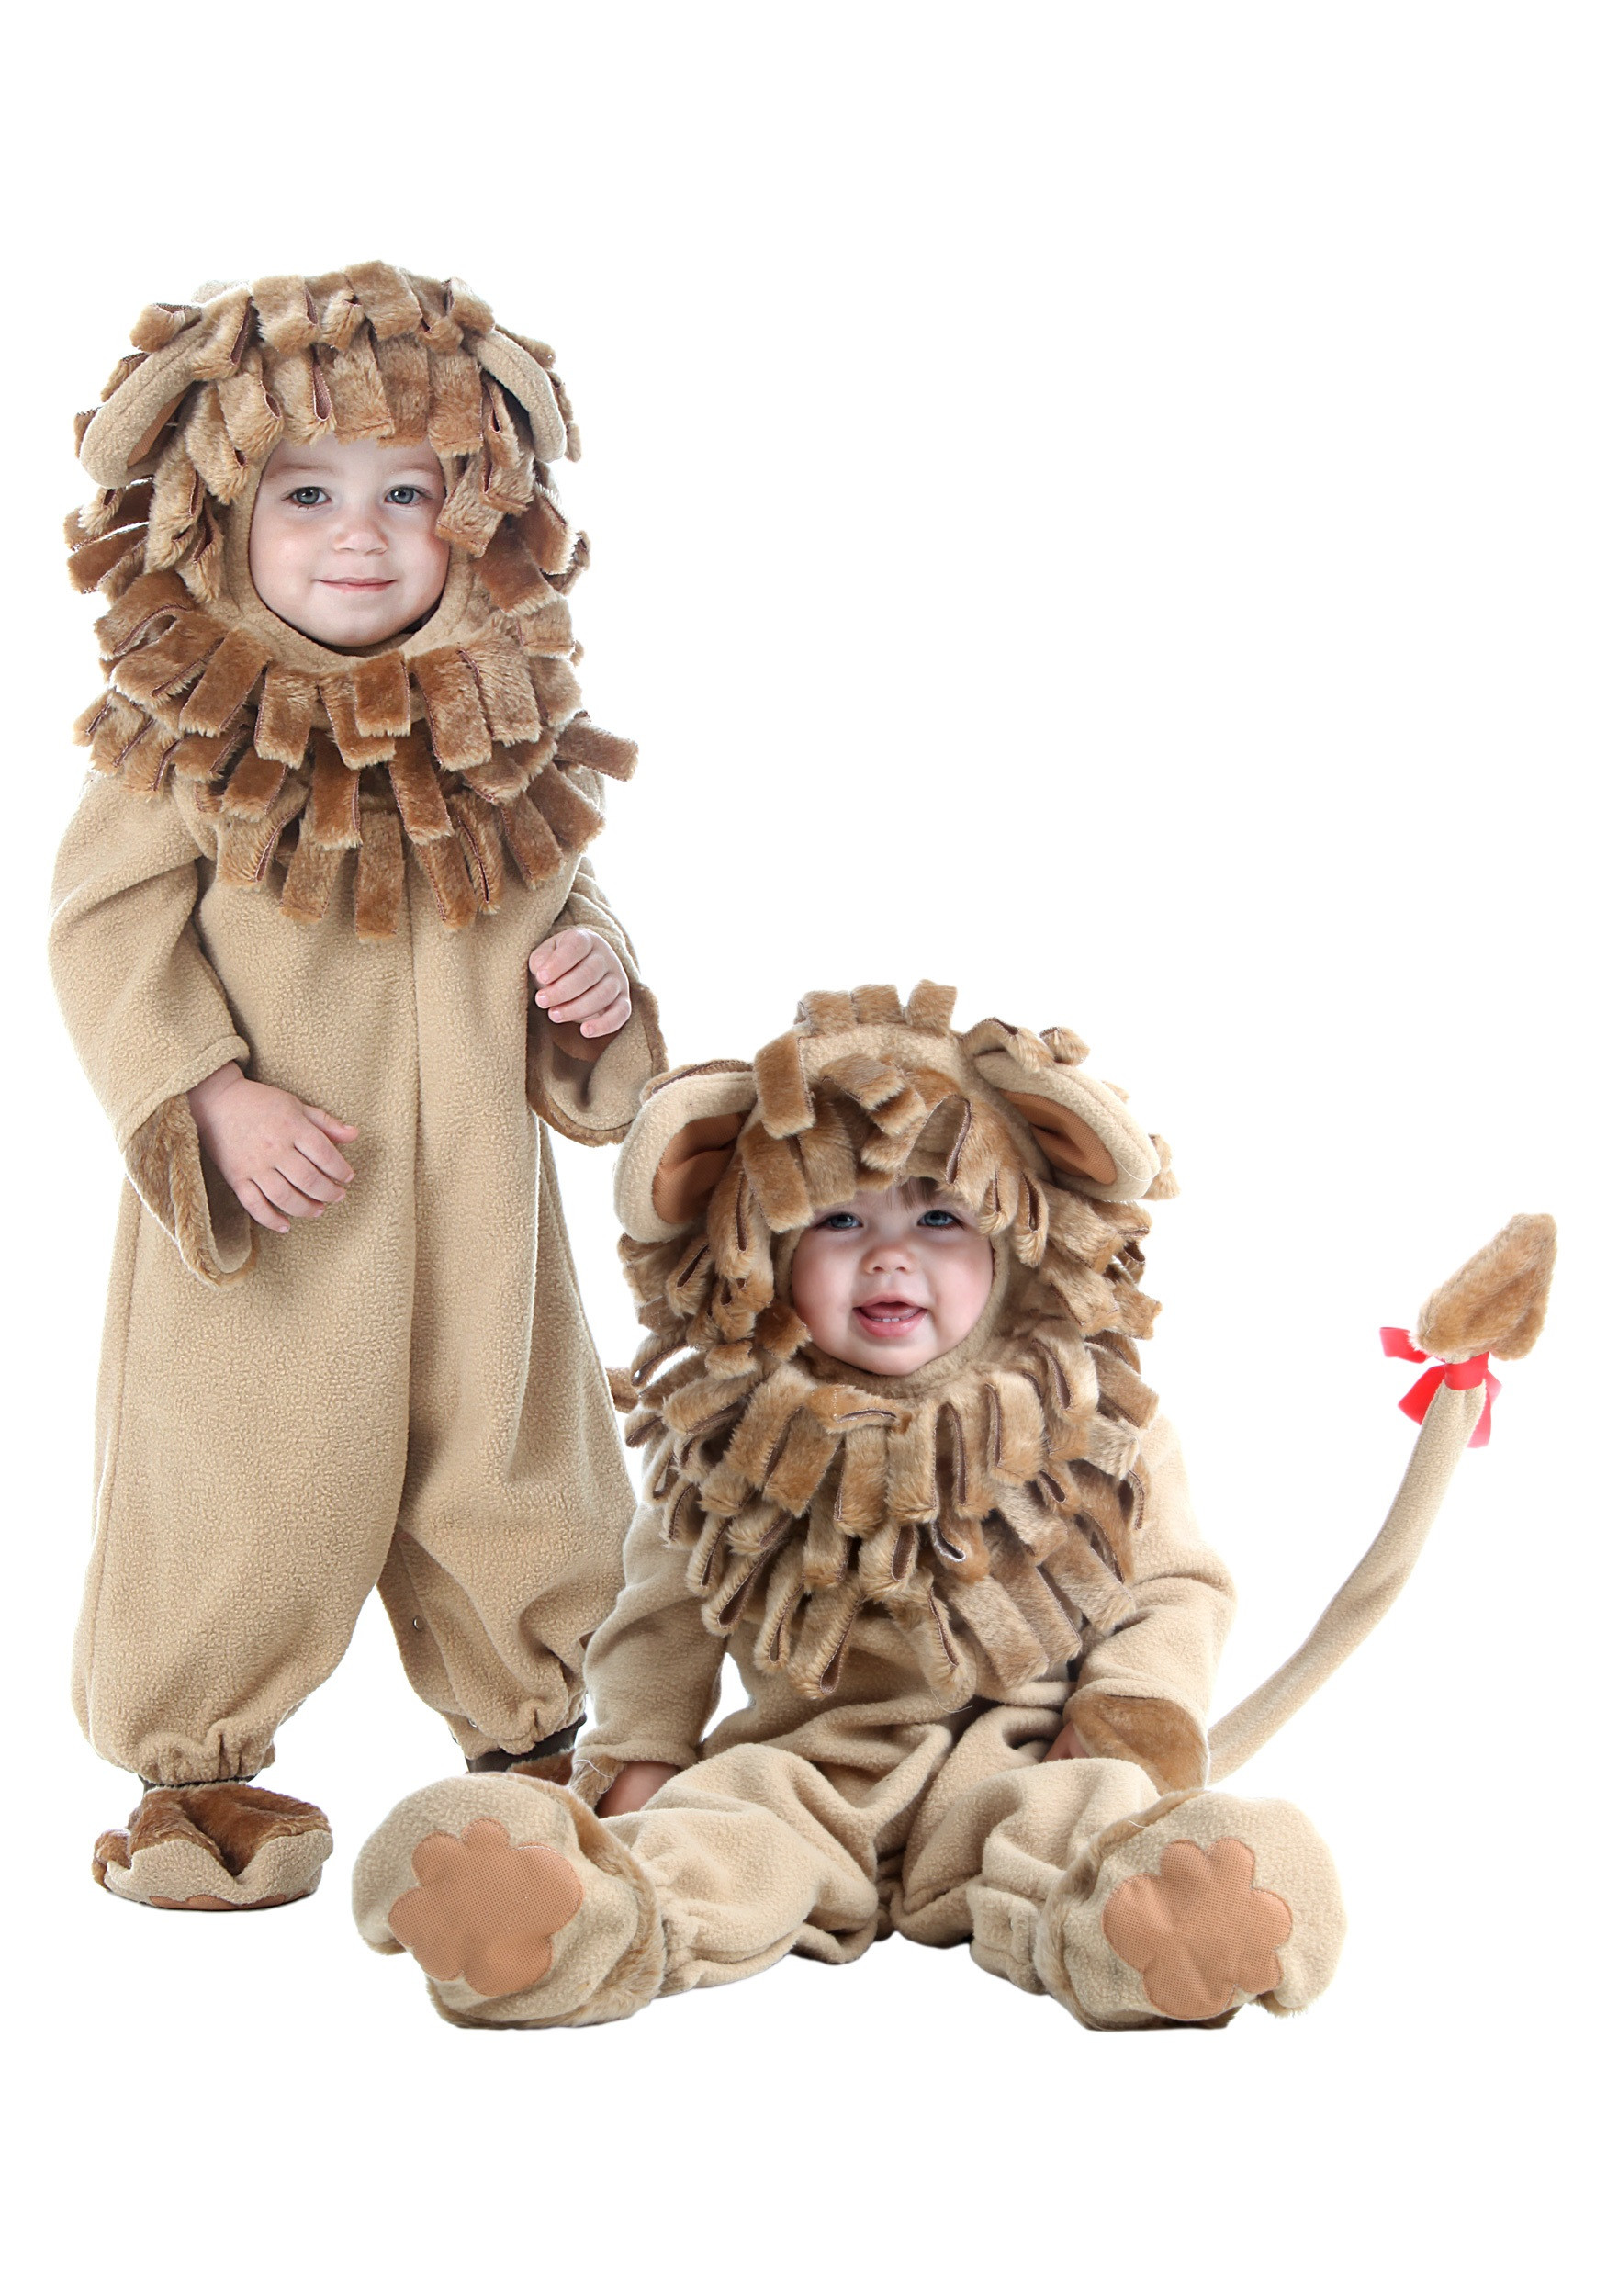 DIY Lion Costume For Toddler
 Deluxe Toddler Lion Costume